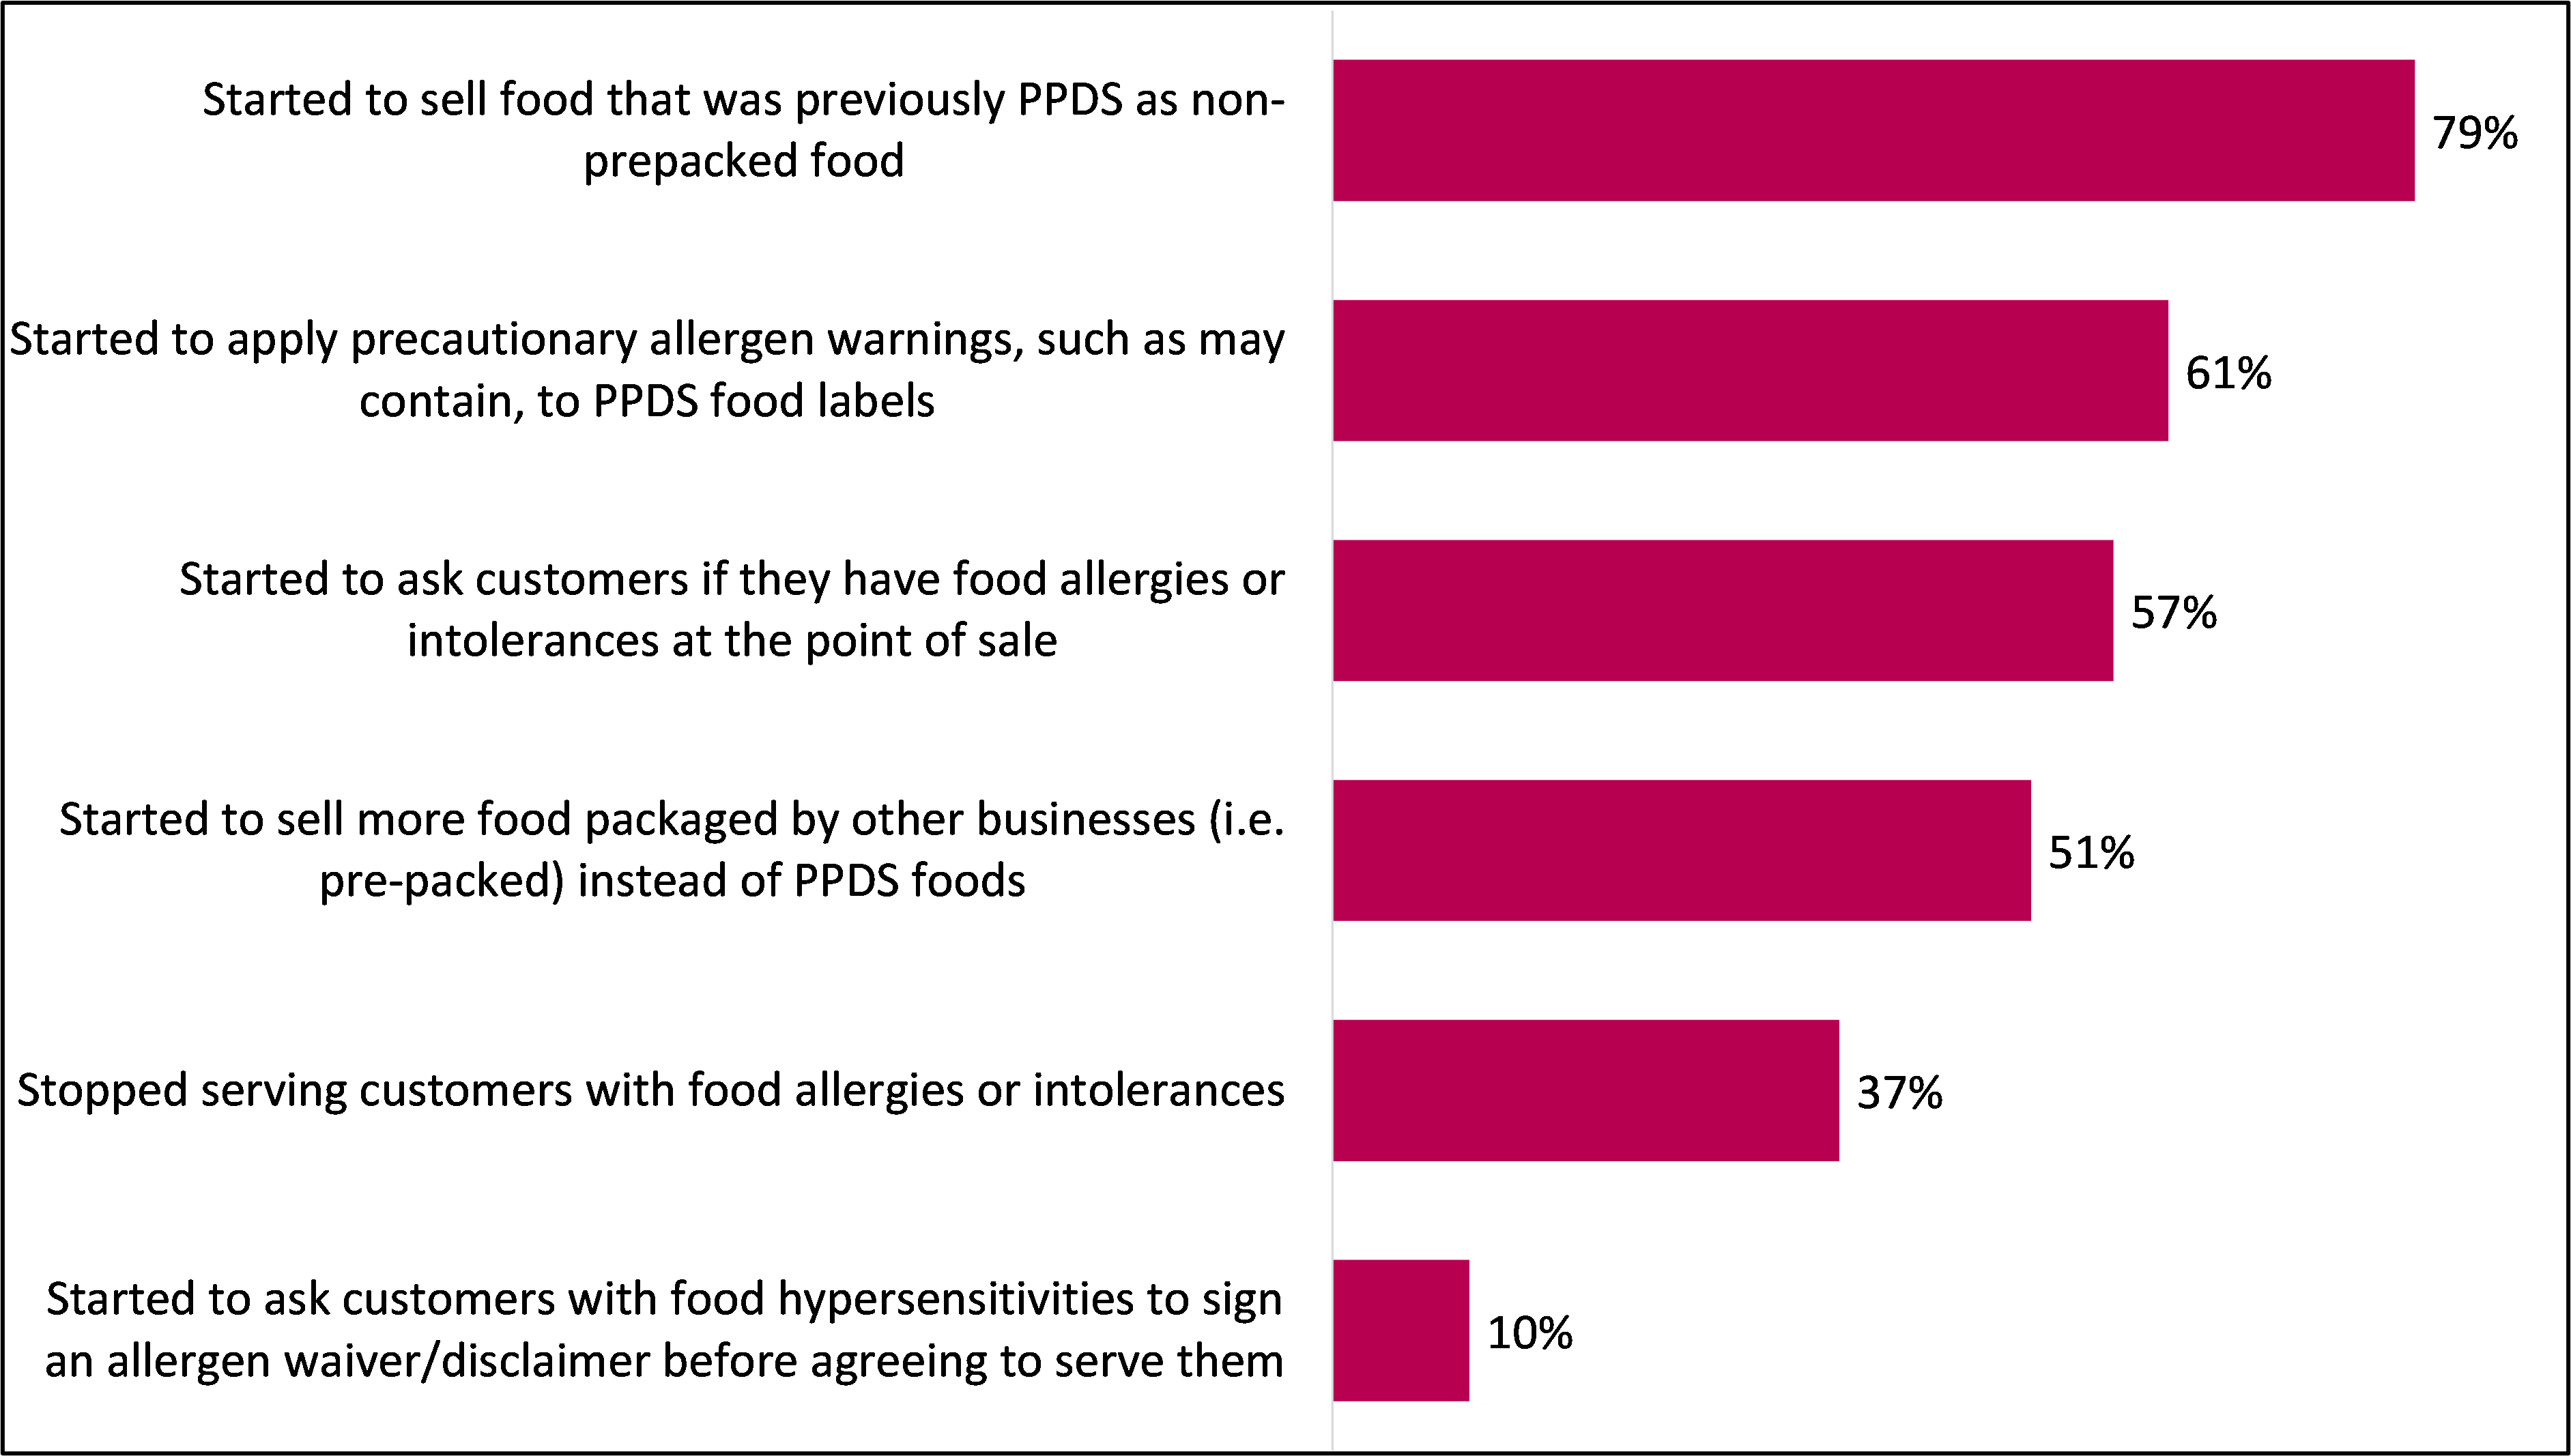 Bar chart showing changes in business practices that Local Authorities reported noticing since labelling requirements were introduced.